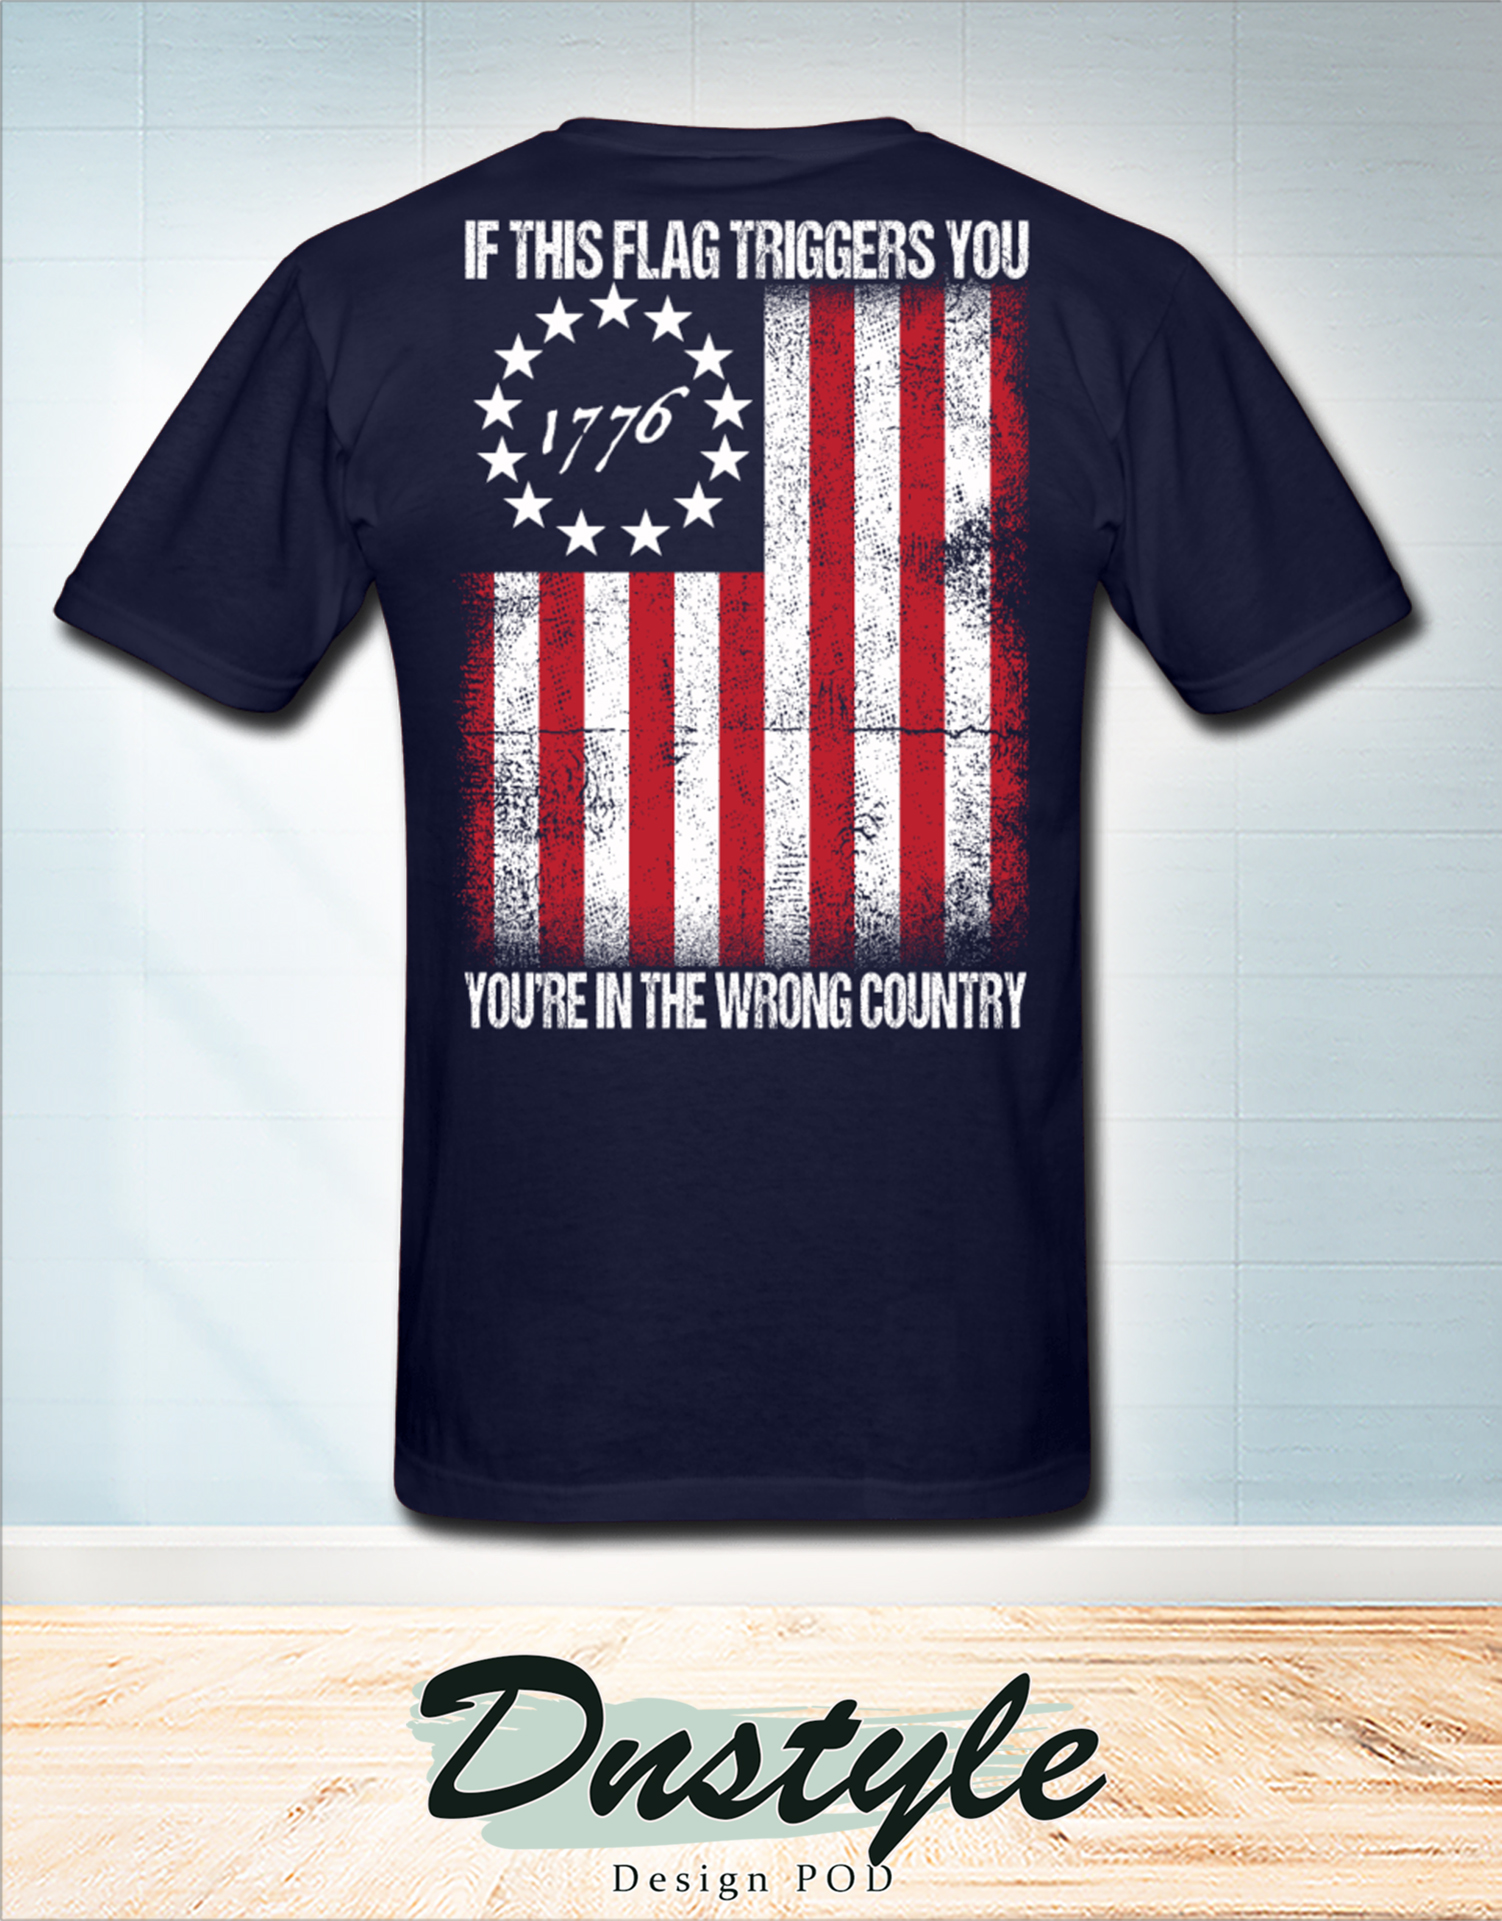 1776 if this flag trigged you you're in the wrong country american flag t-shirt 2